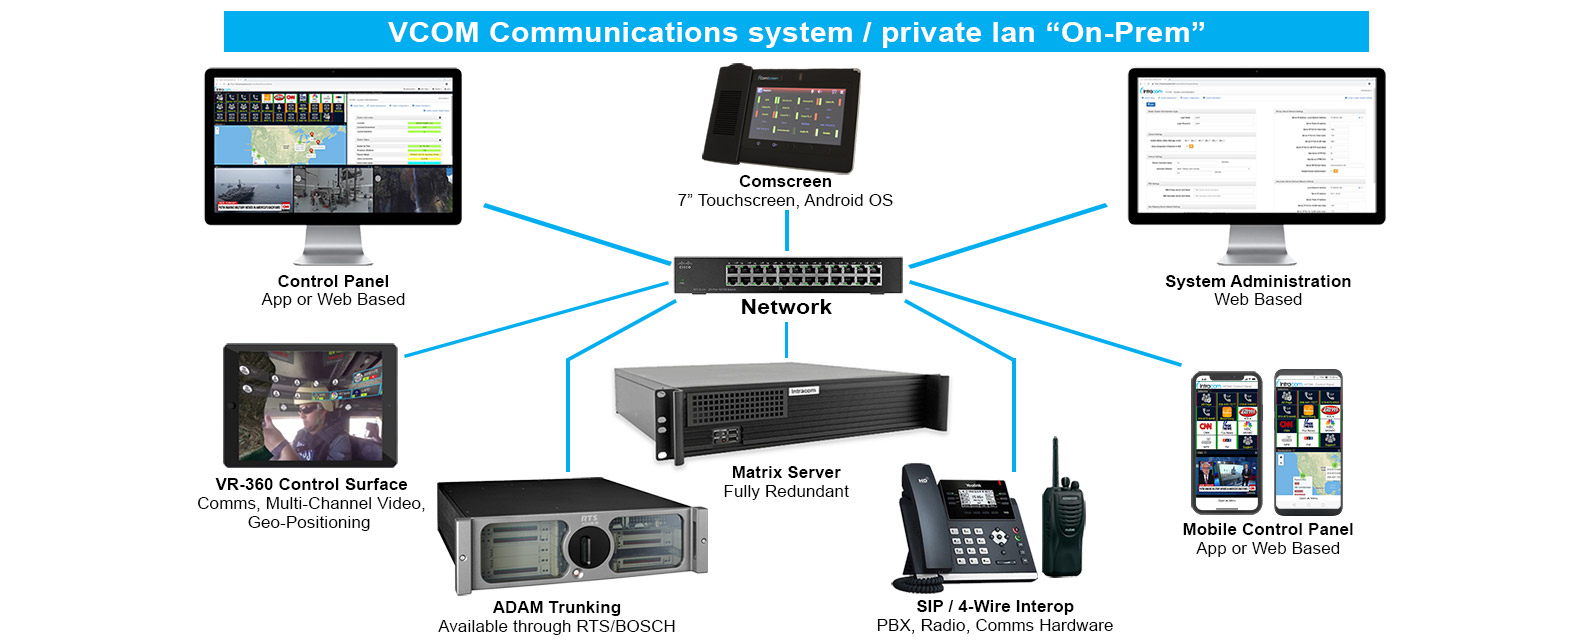 comscreen, adam, sip phone, radio, smart devices all connected to vcom